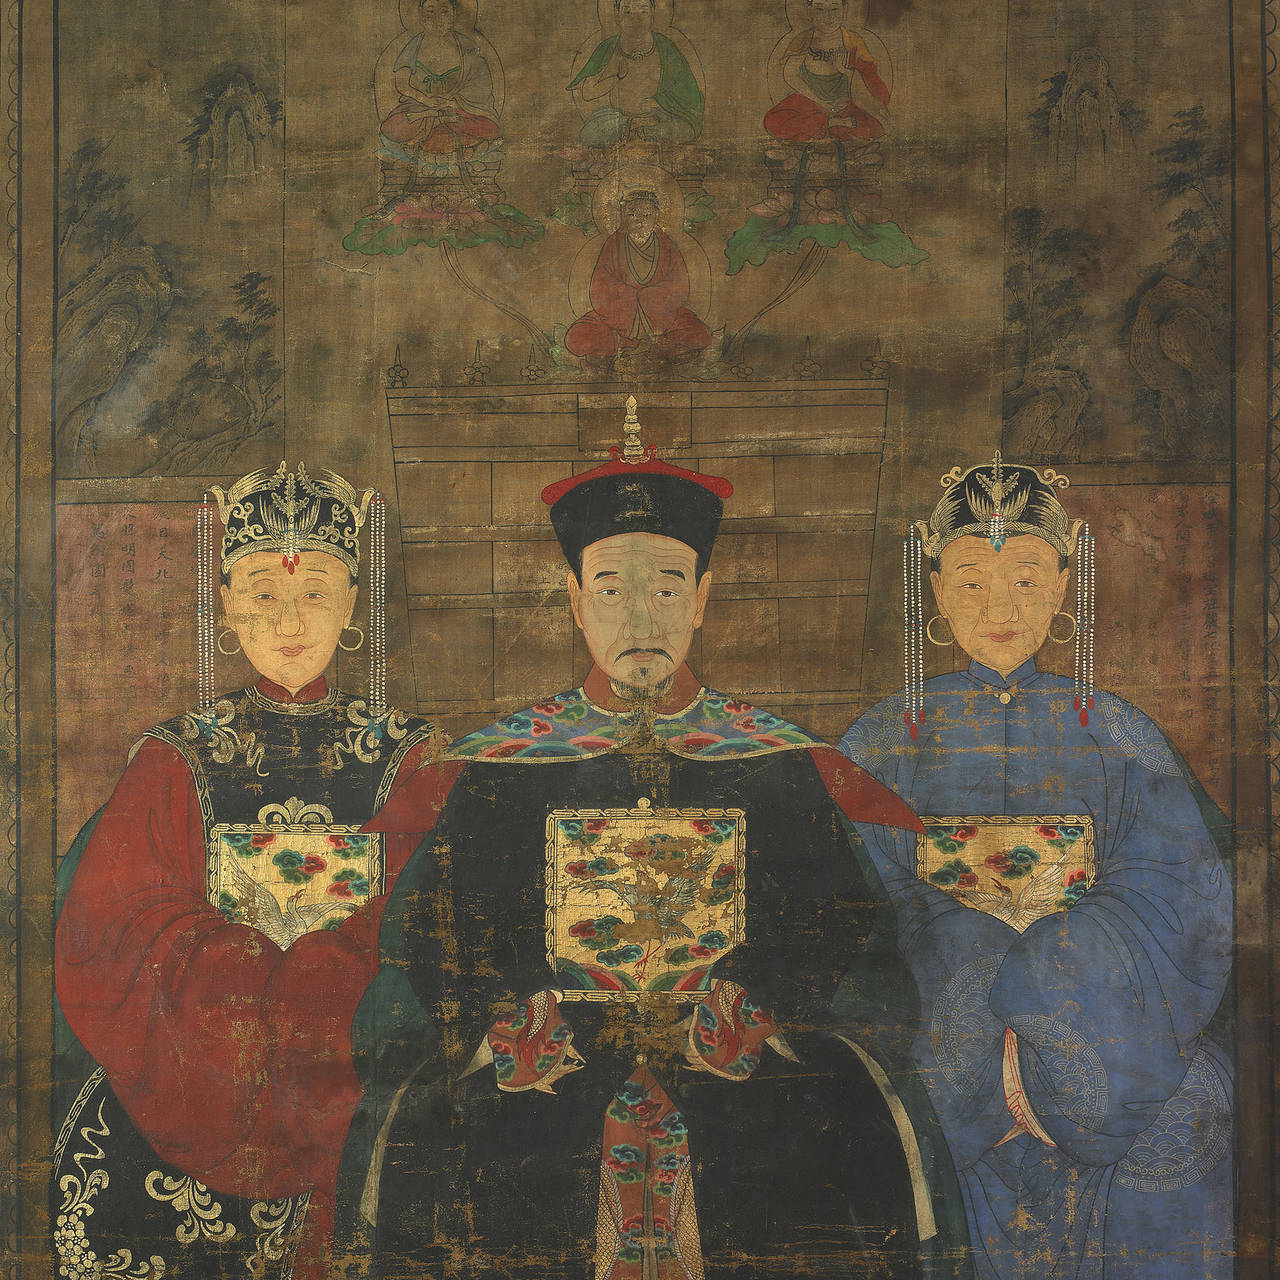 Imperial dignitary's portrait with his consorts. A large painting full of traditional Chinese symbols Qiuialong's ages as the beautiful dragon that wraps around dignitary's robe, a symbol used only by emperor and important dignitary, or even the